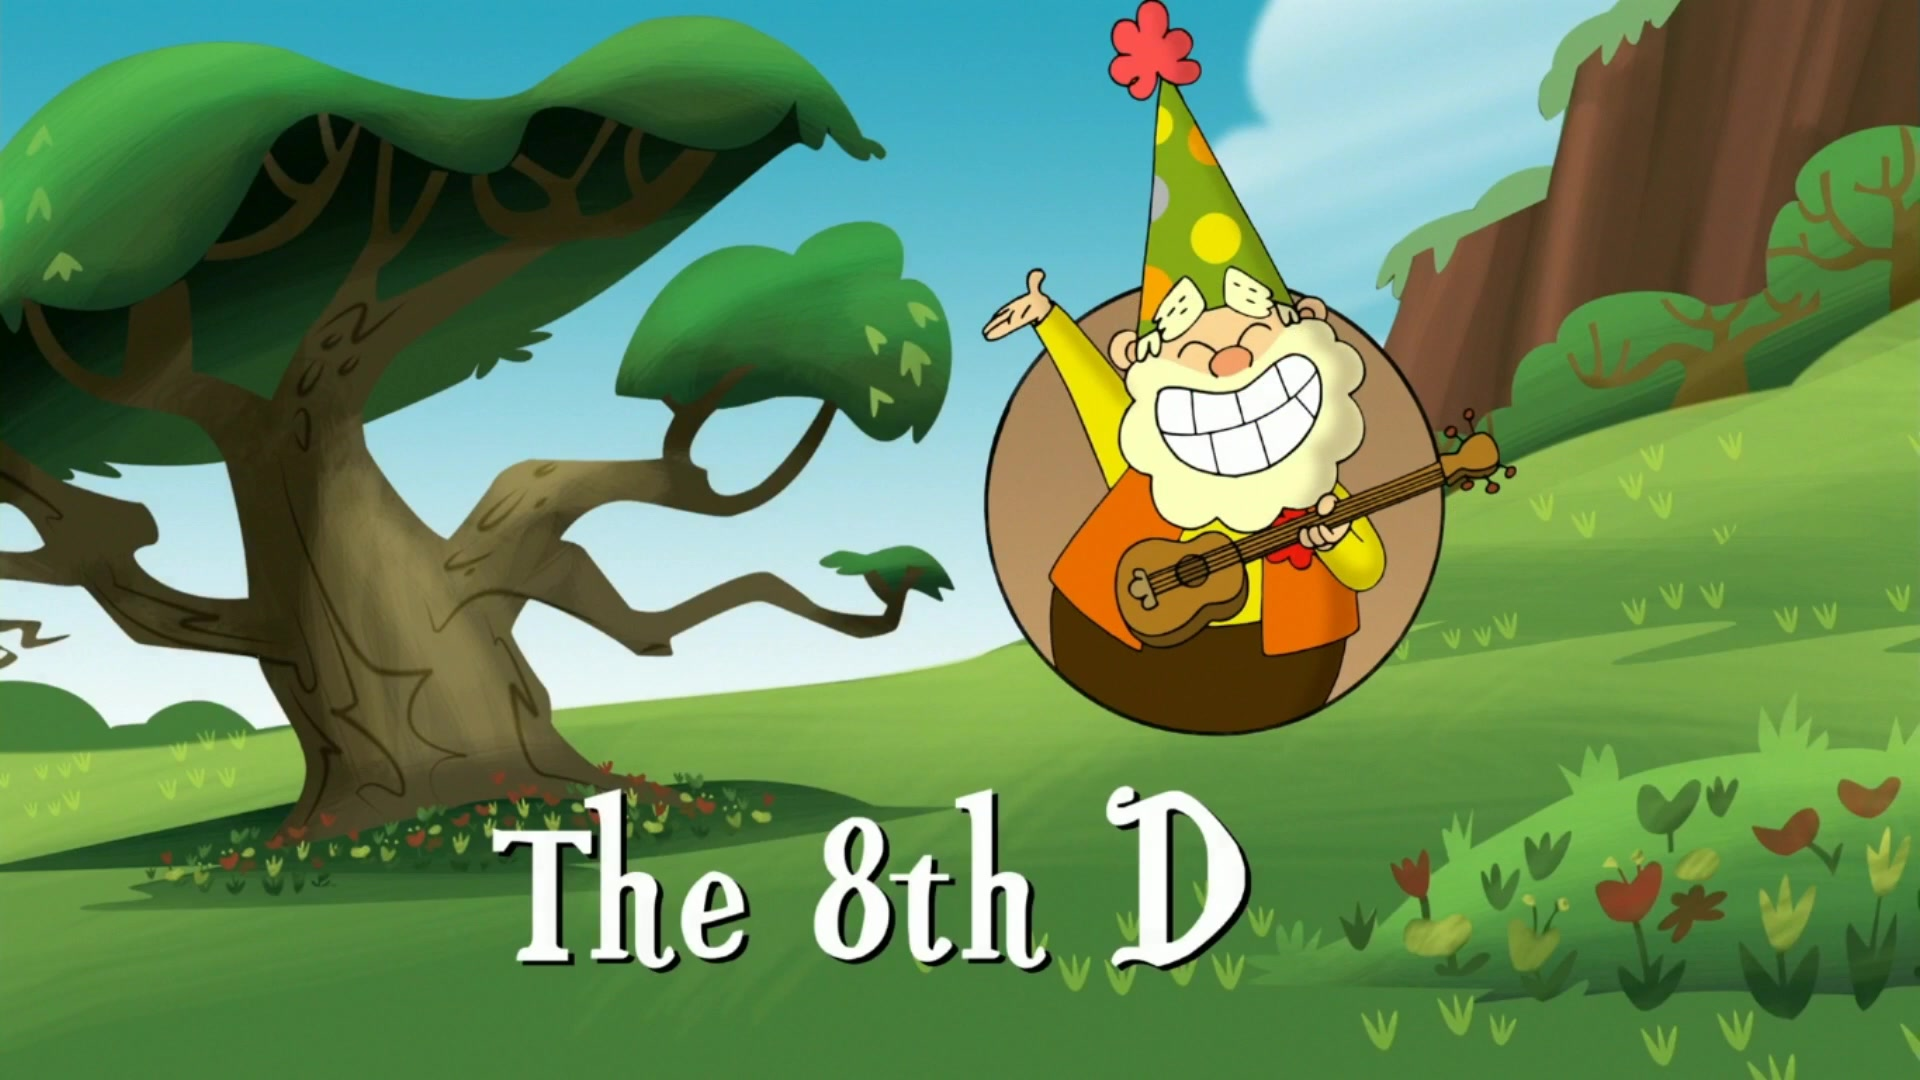 The 8th D